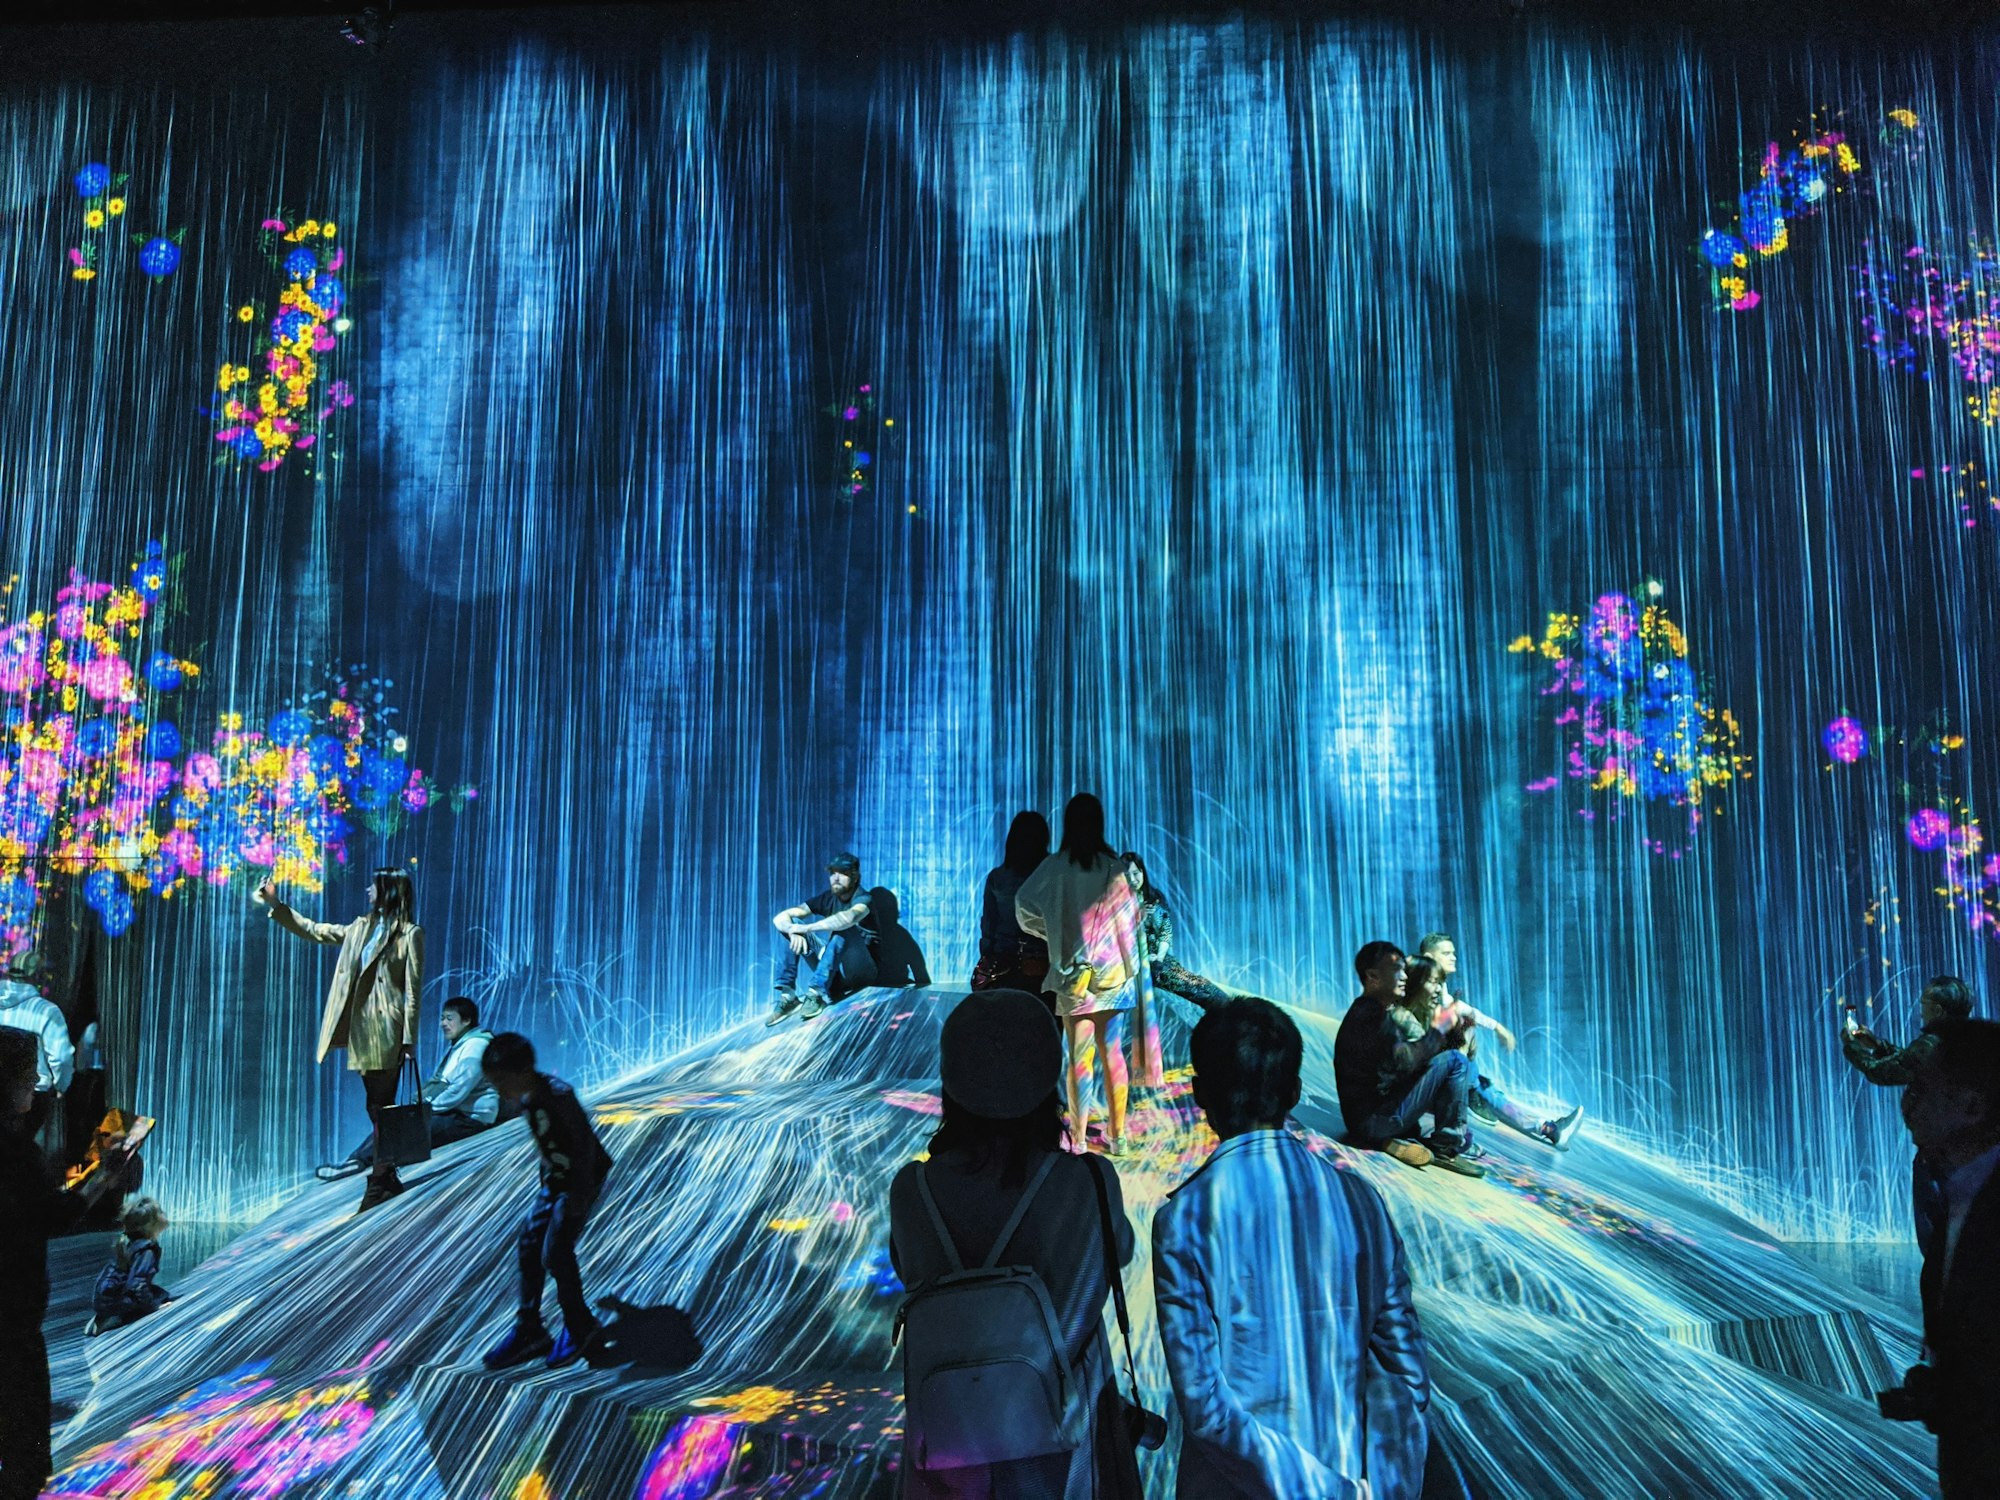 Visitors in a digital waterfall and flower light exhibit